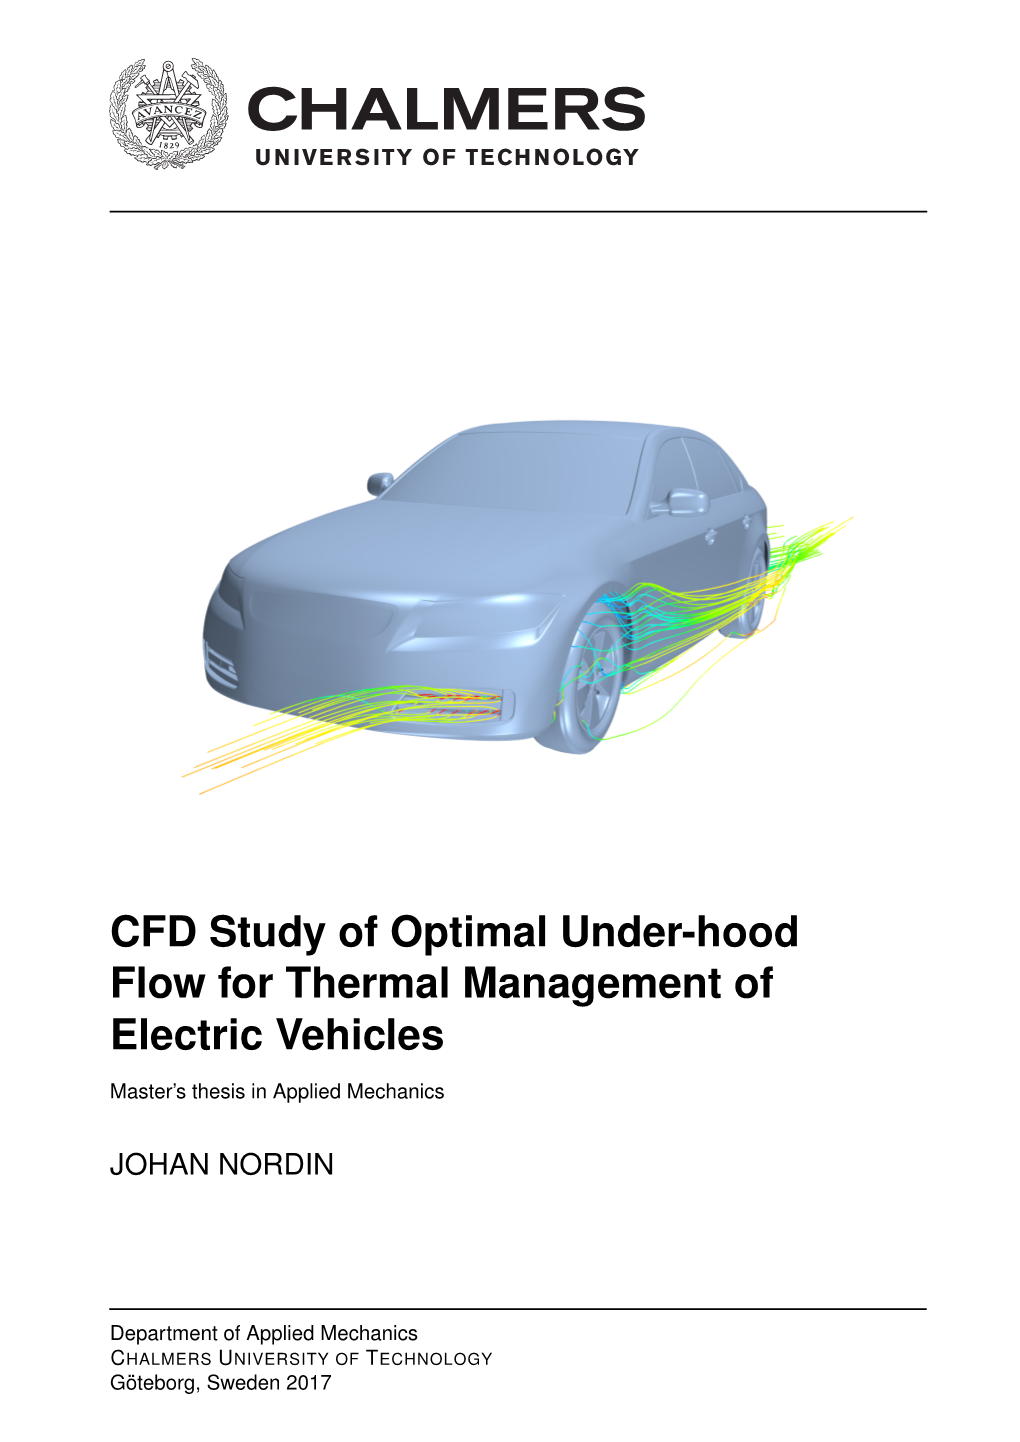 CFD Study of Optimal Under-Hood Flow for Thermal Management of Electric Vehicles